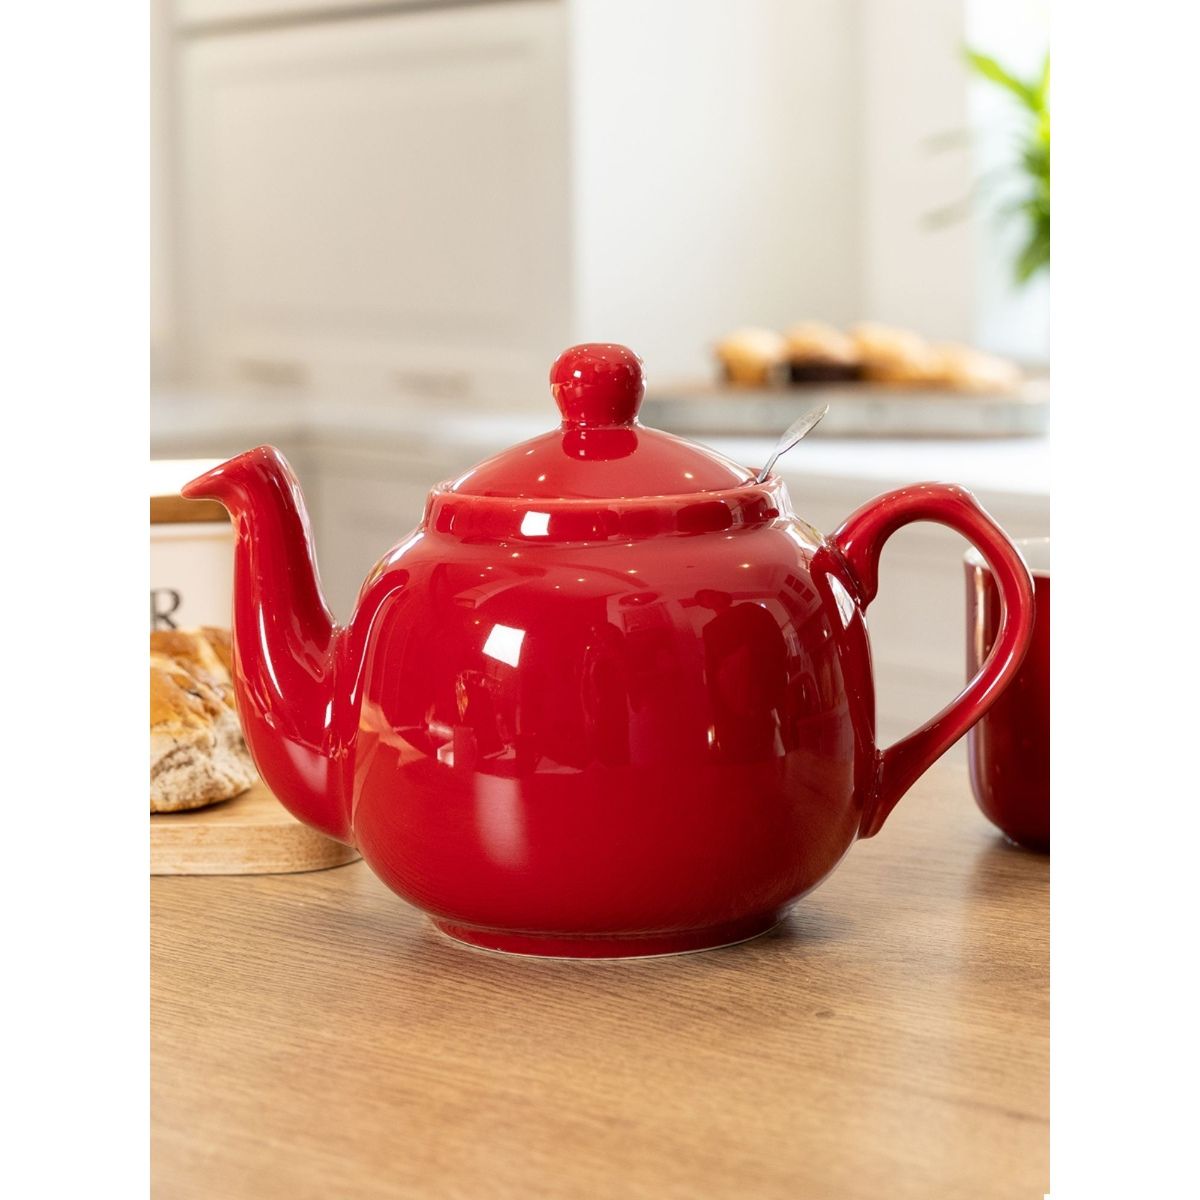 Buy London Pottery Farmhouse Teapot, Red, Four Cup - 900Ml Online